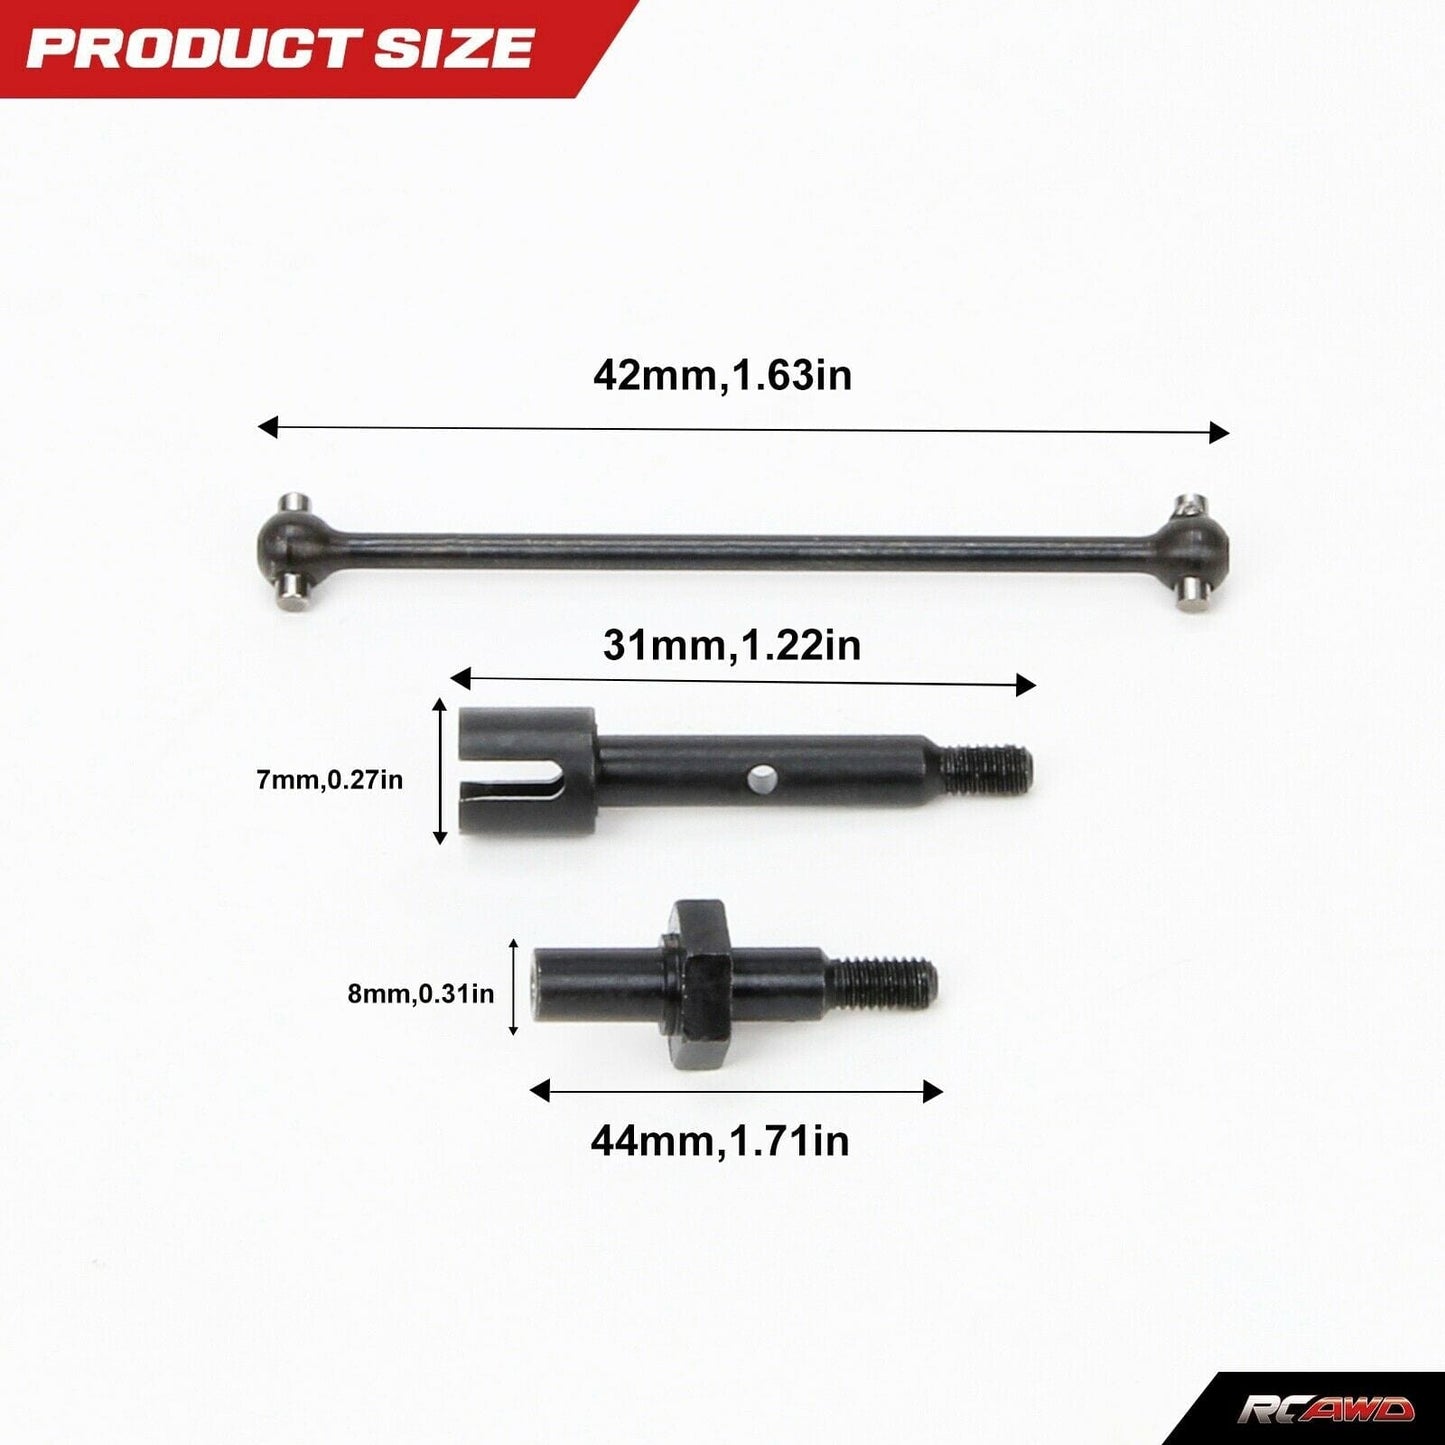 RCAWD Losi Mini Buggy/Tuggy Dogbone Drive Shaft Front Rear Axle LOS212013 RCAWD